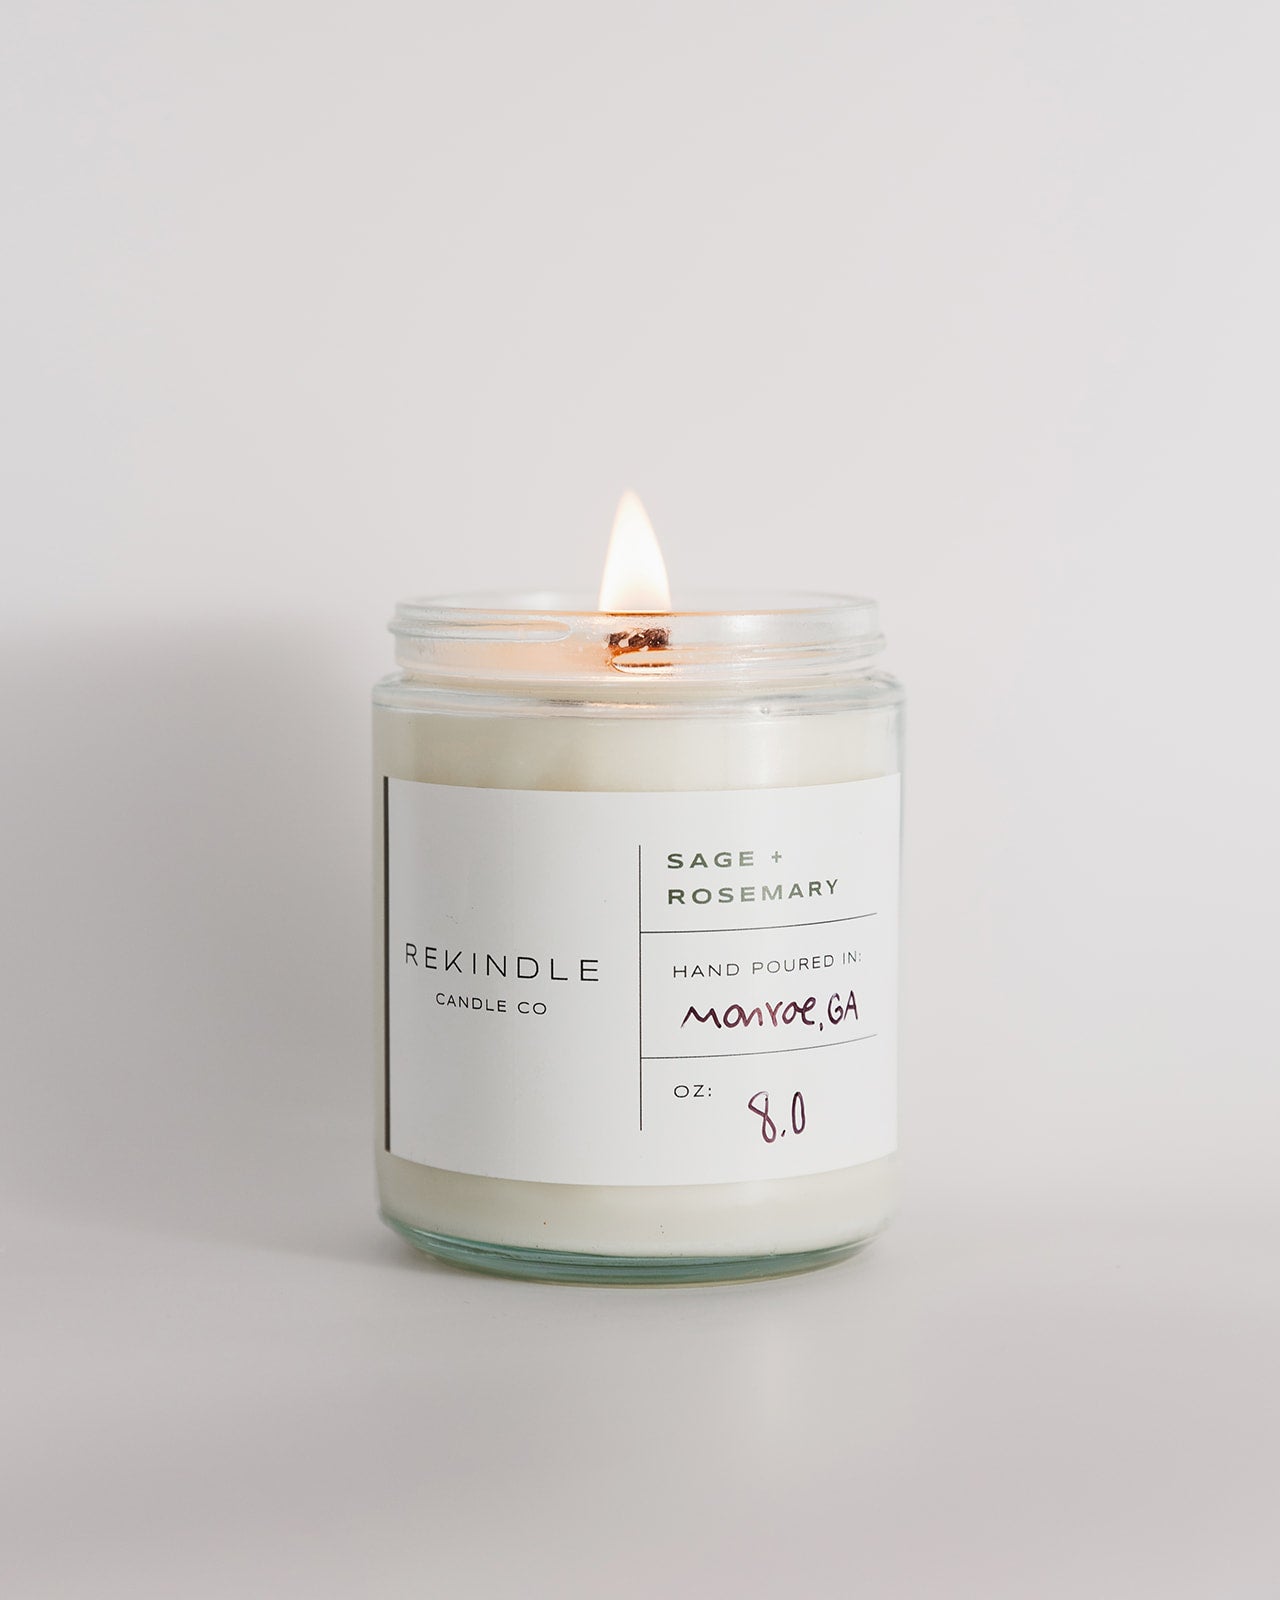 Sage + Rosemary Soy Candle